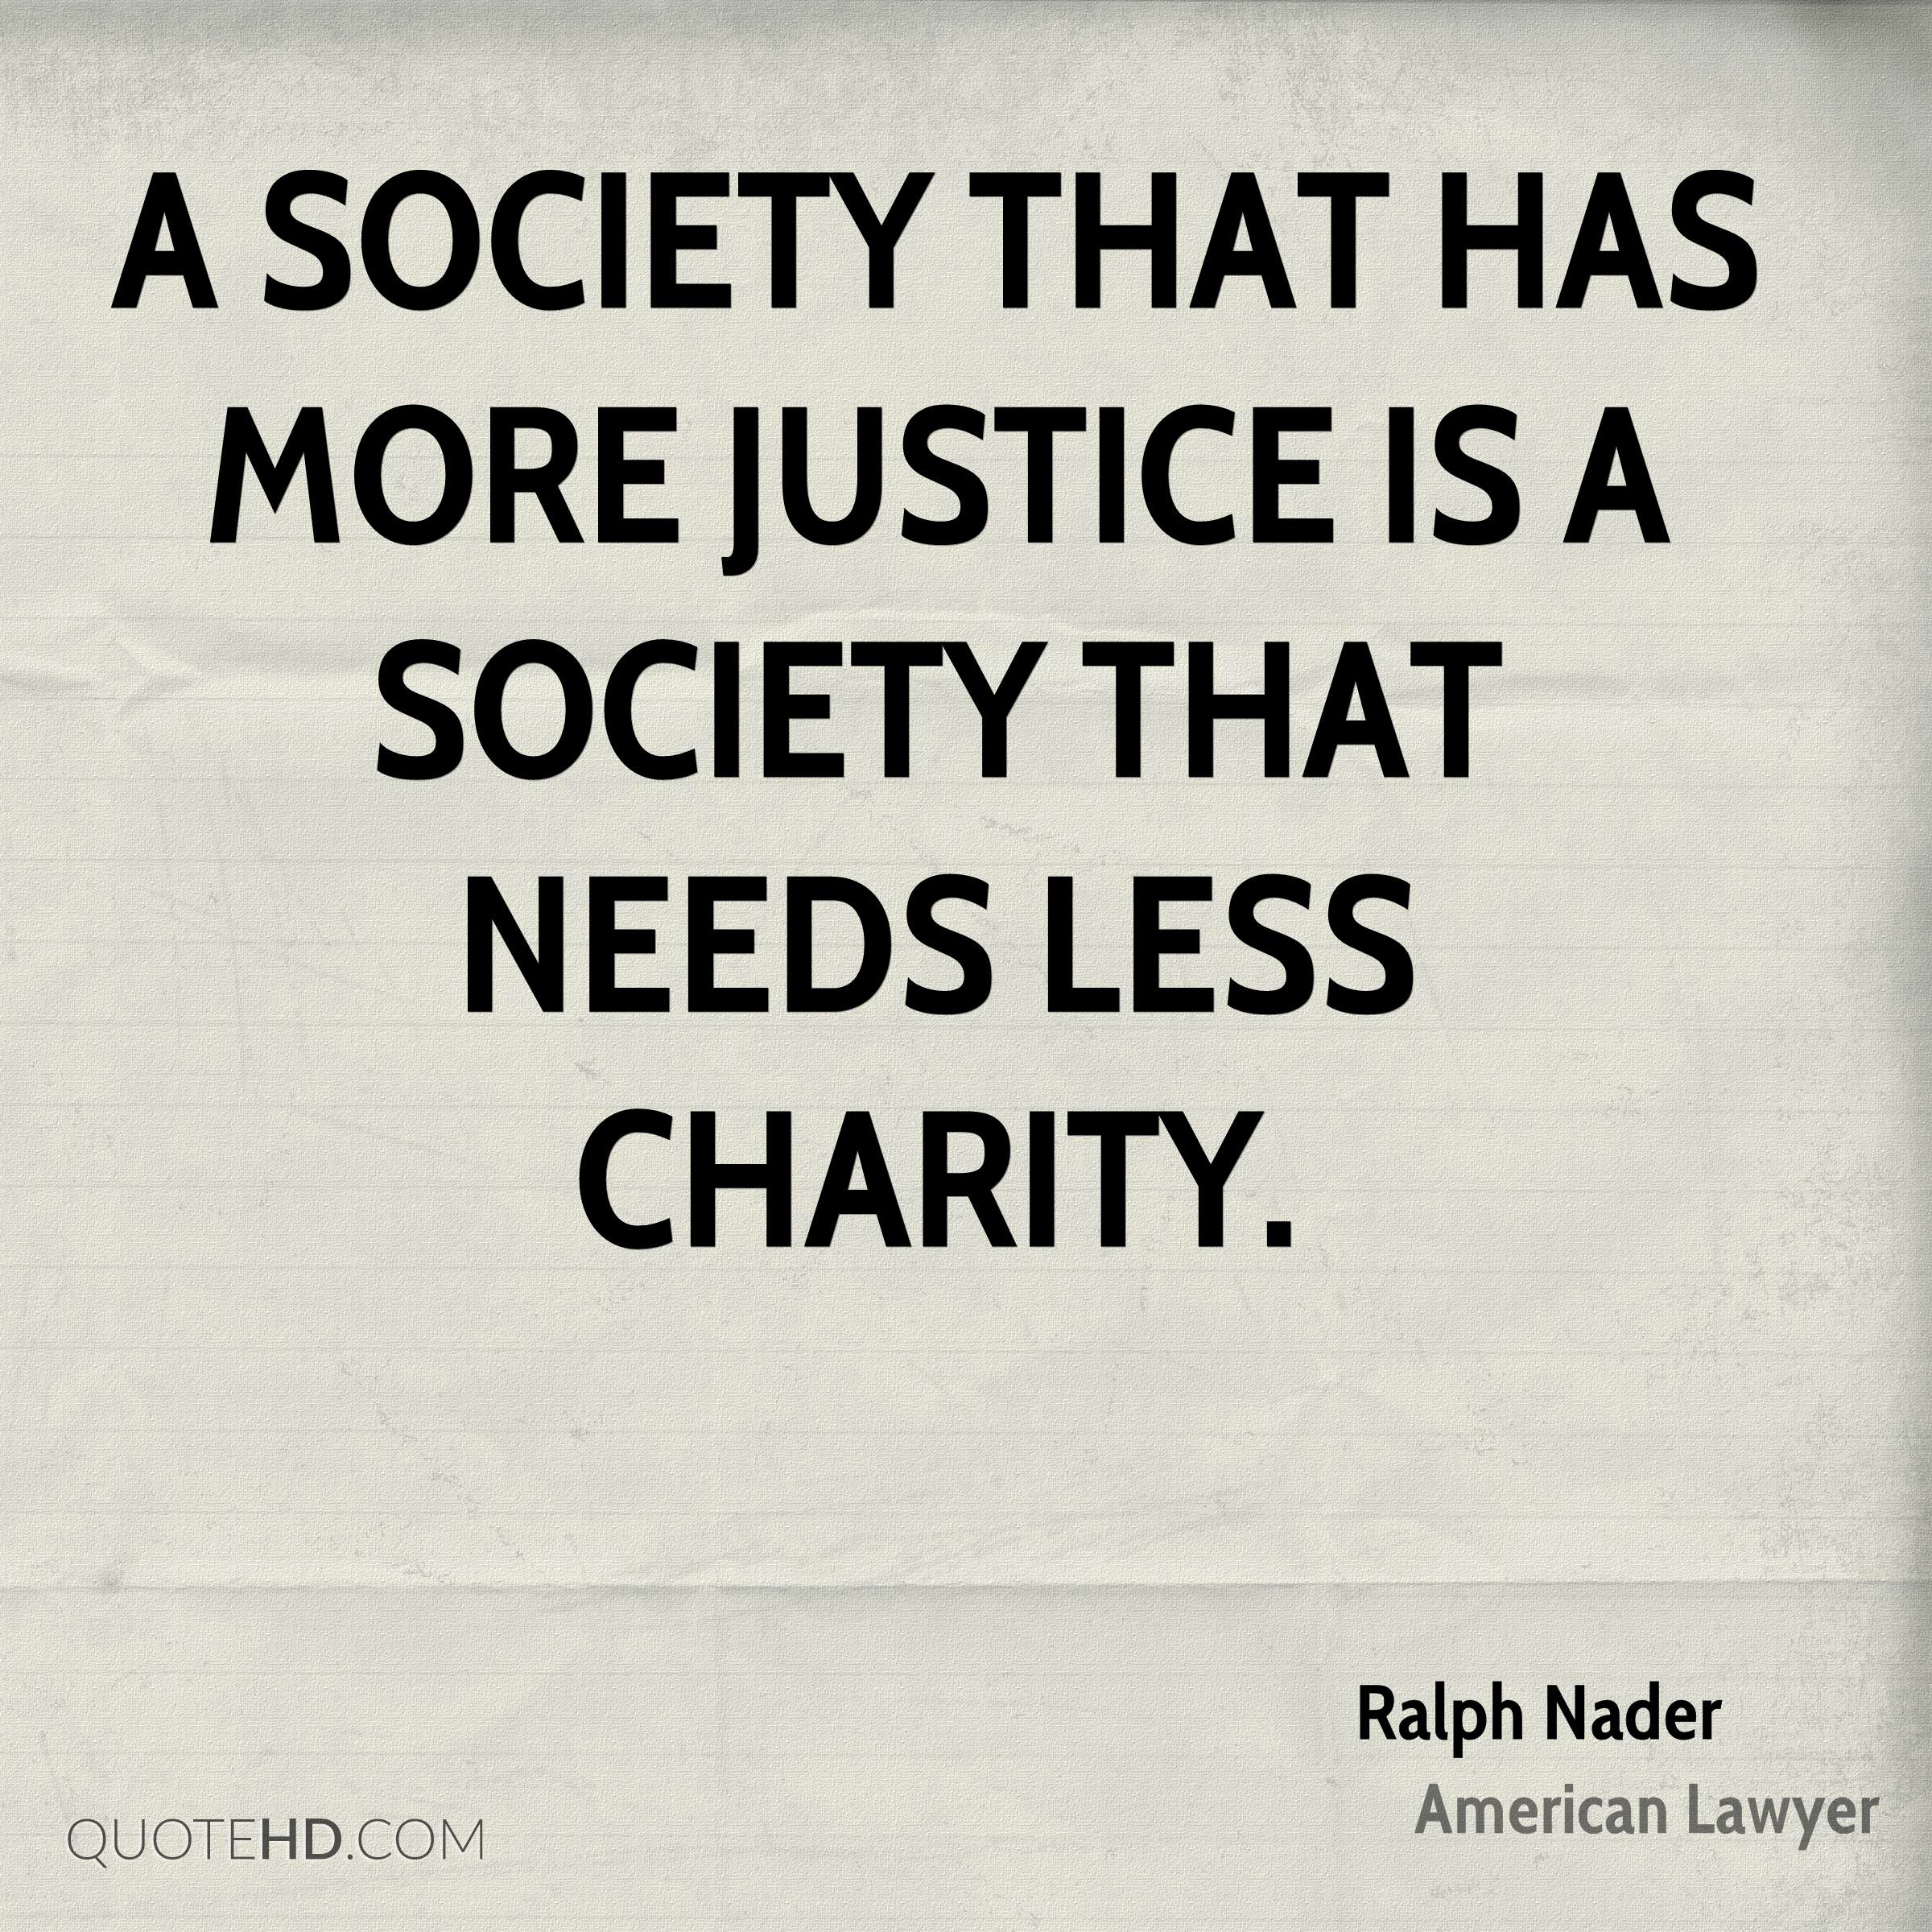 A society that has more justice is a society that needs less charity. Ralph Nader